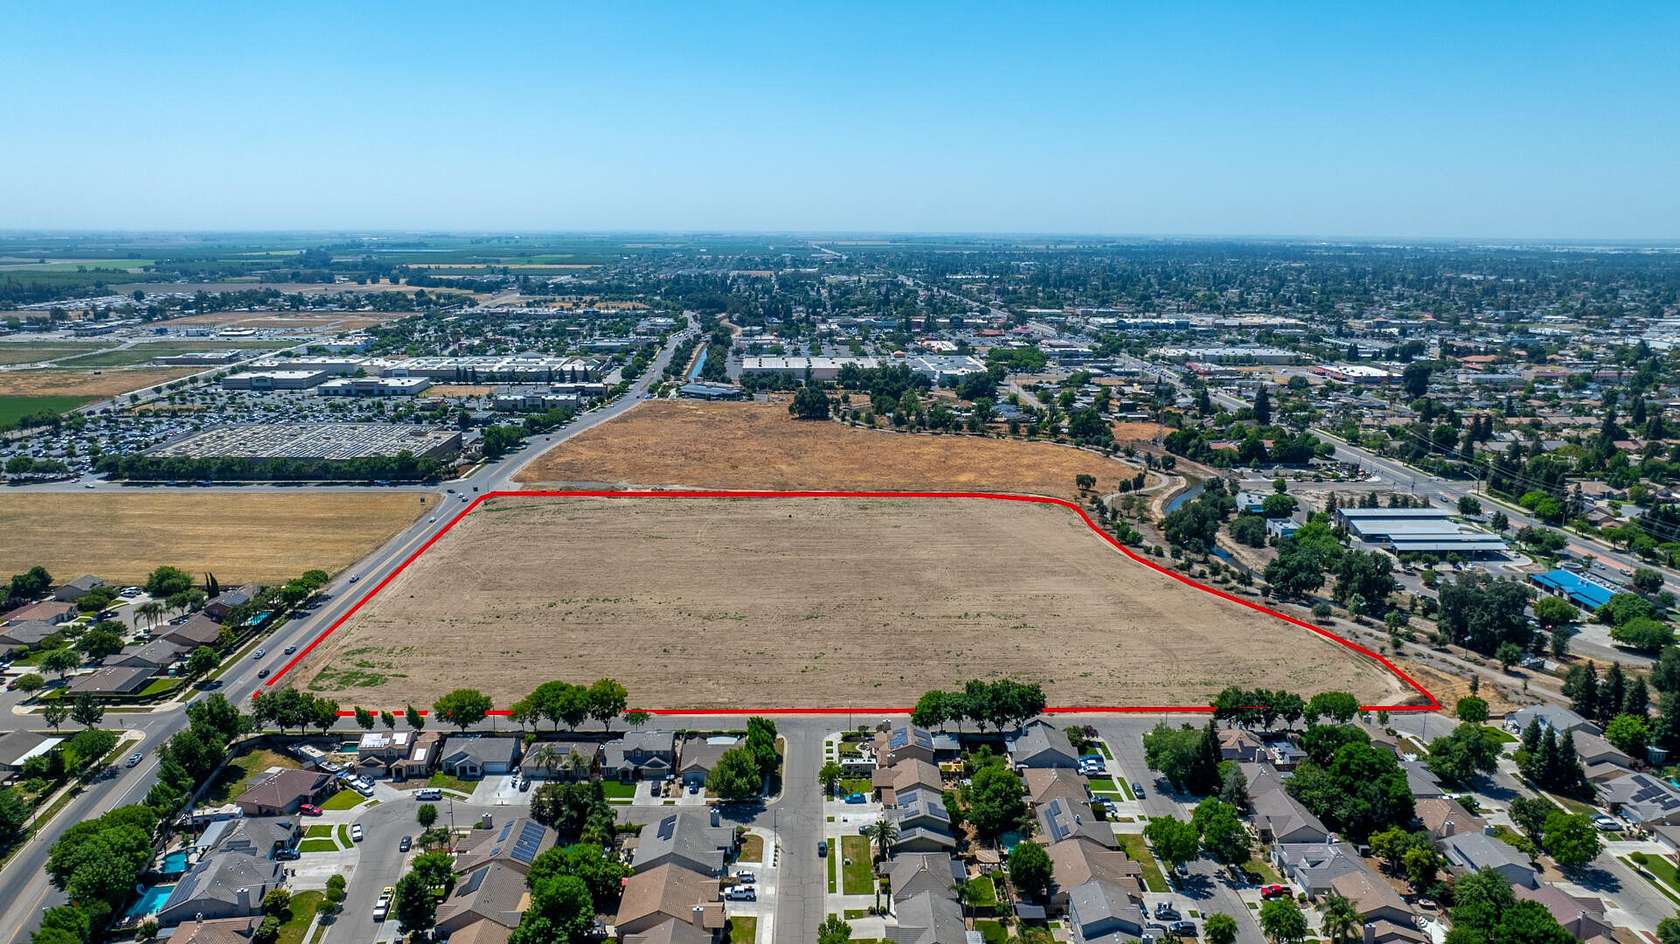 18.4 Acres of Mixed-Use Land for Sale in Visalia, California